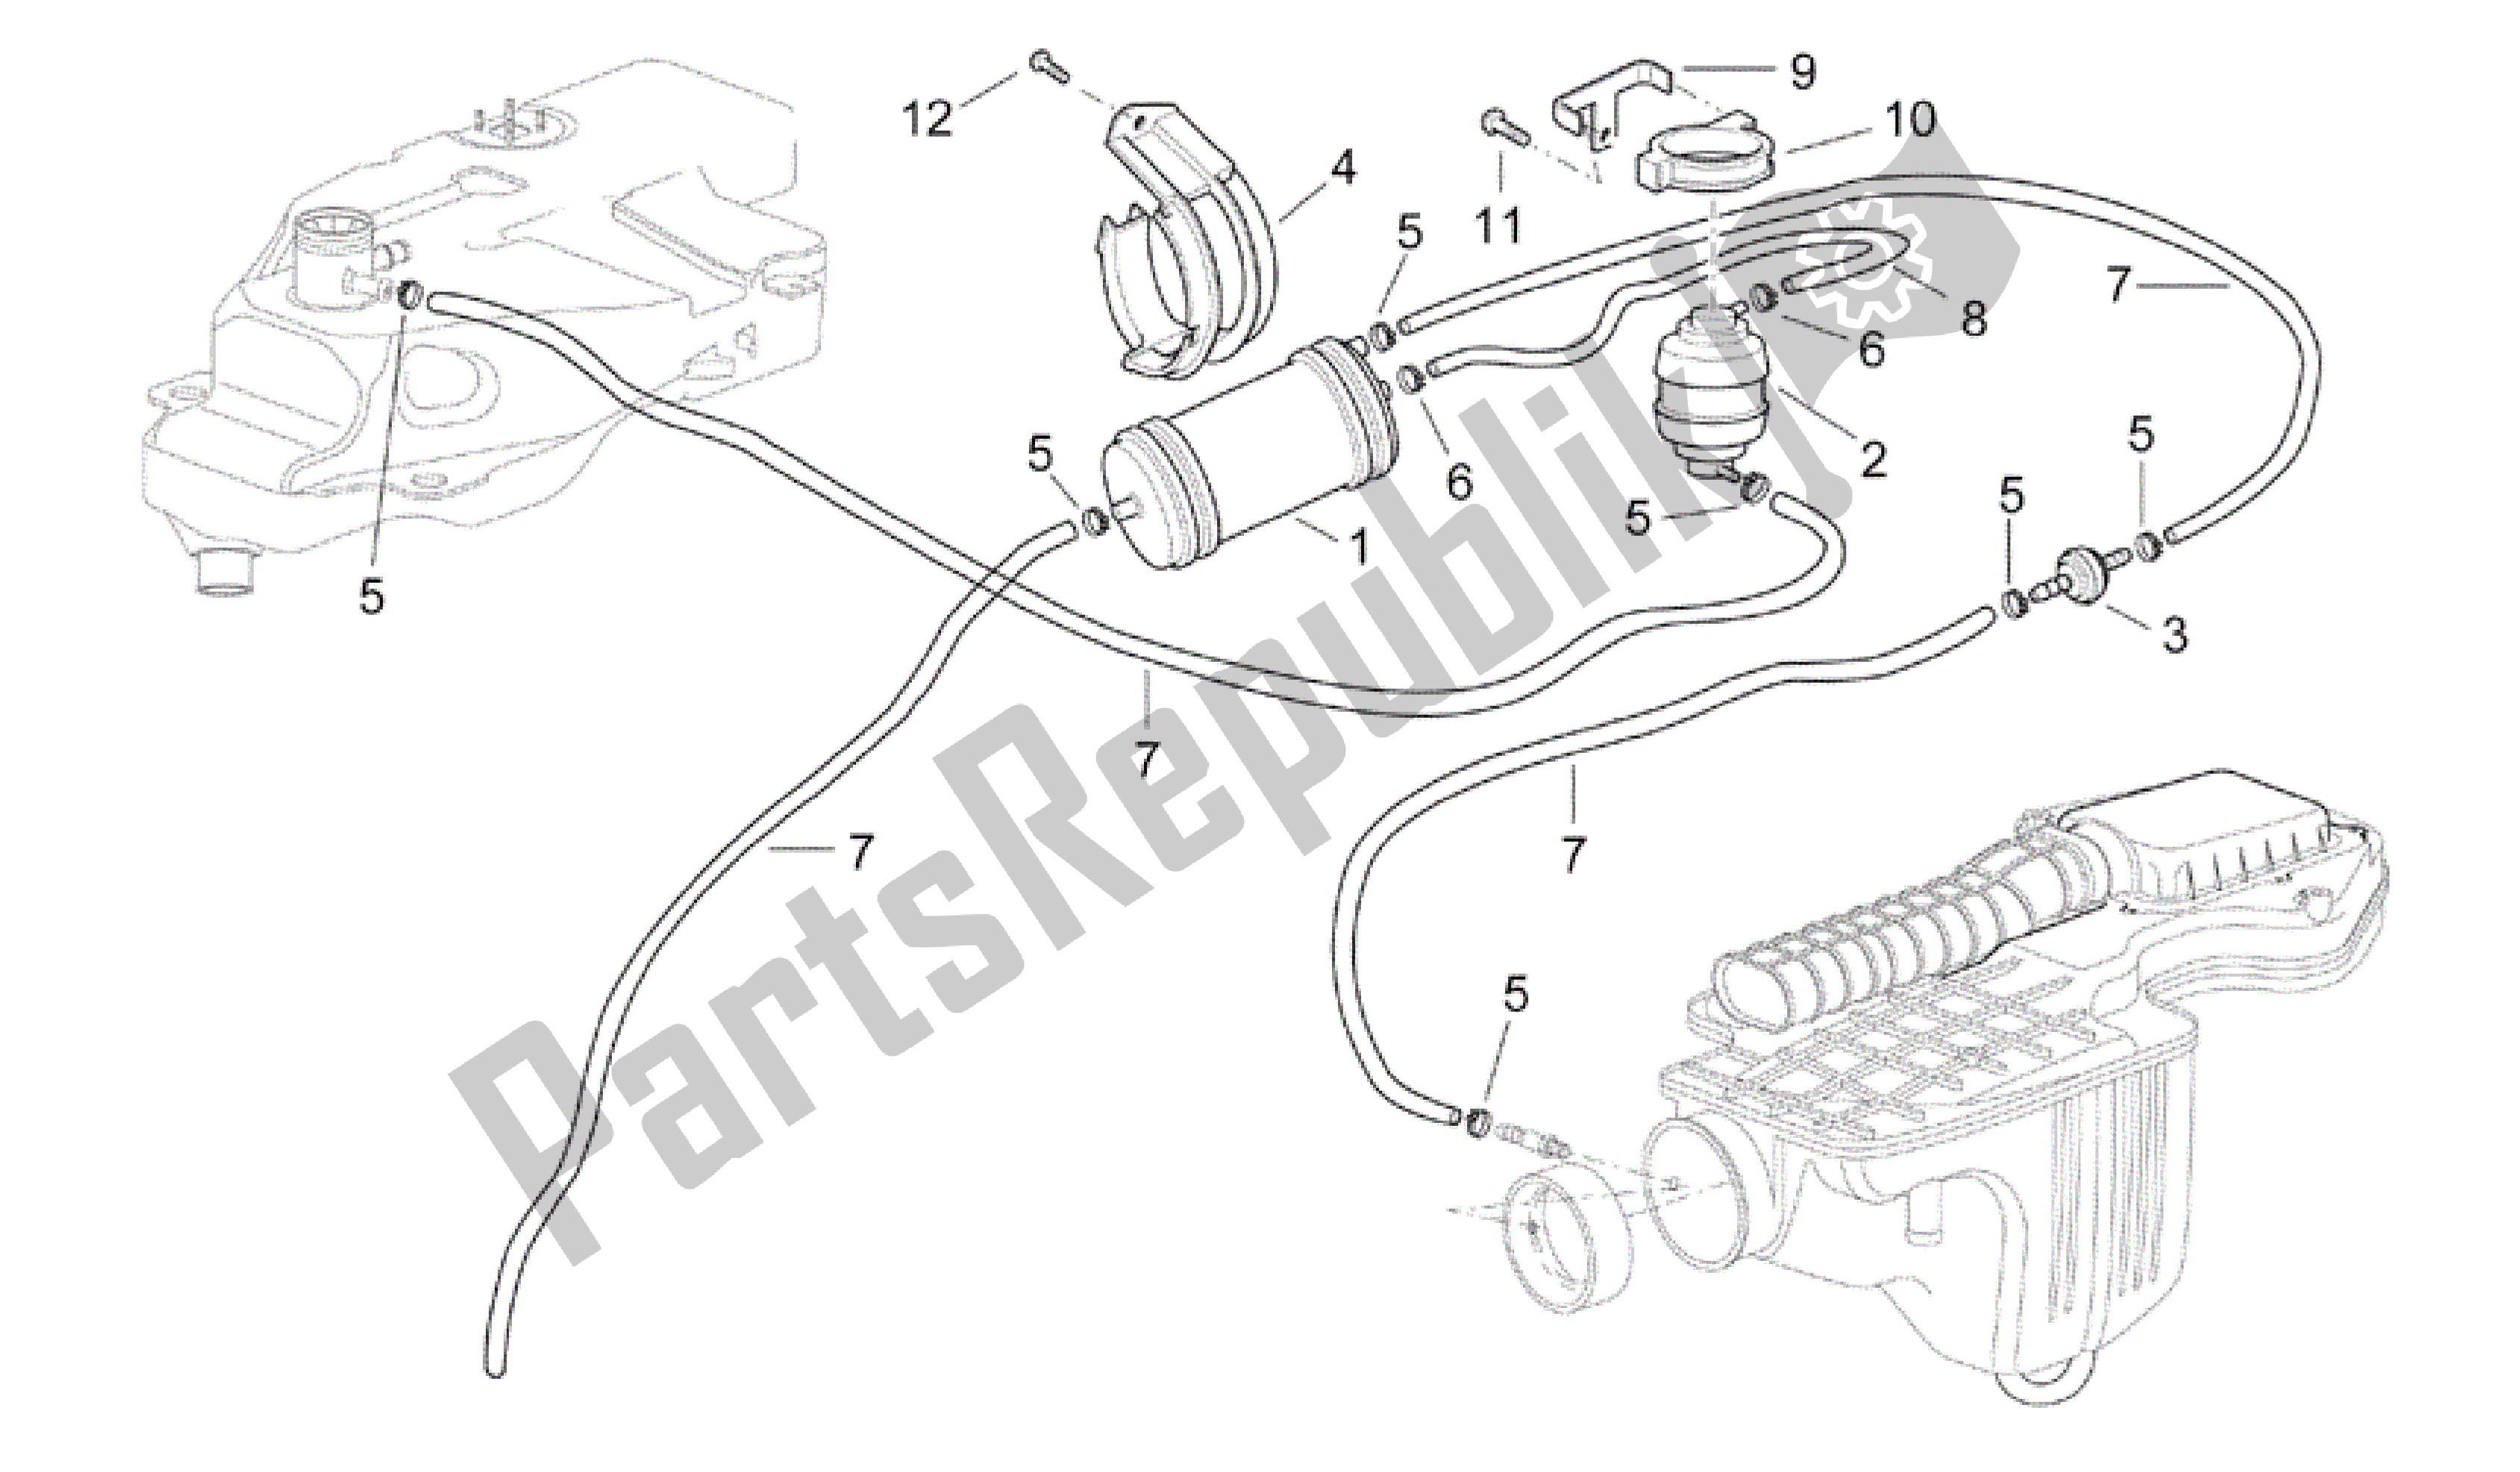 All parts for the Fuel Vapour Recover System of the Aprilia Scarabeo 500 2003 - 2006